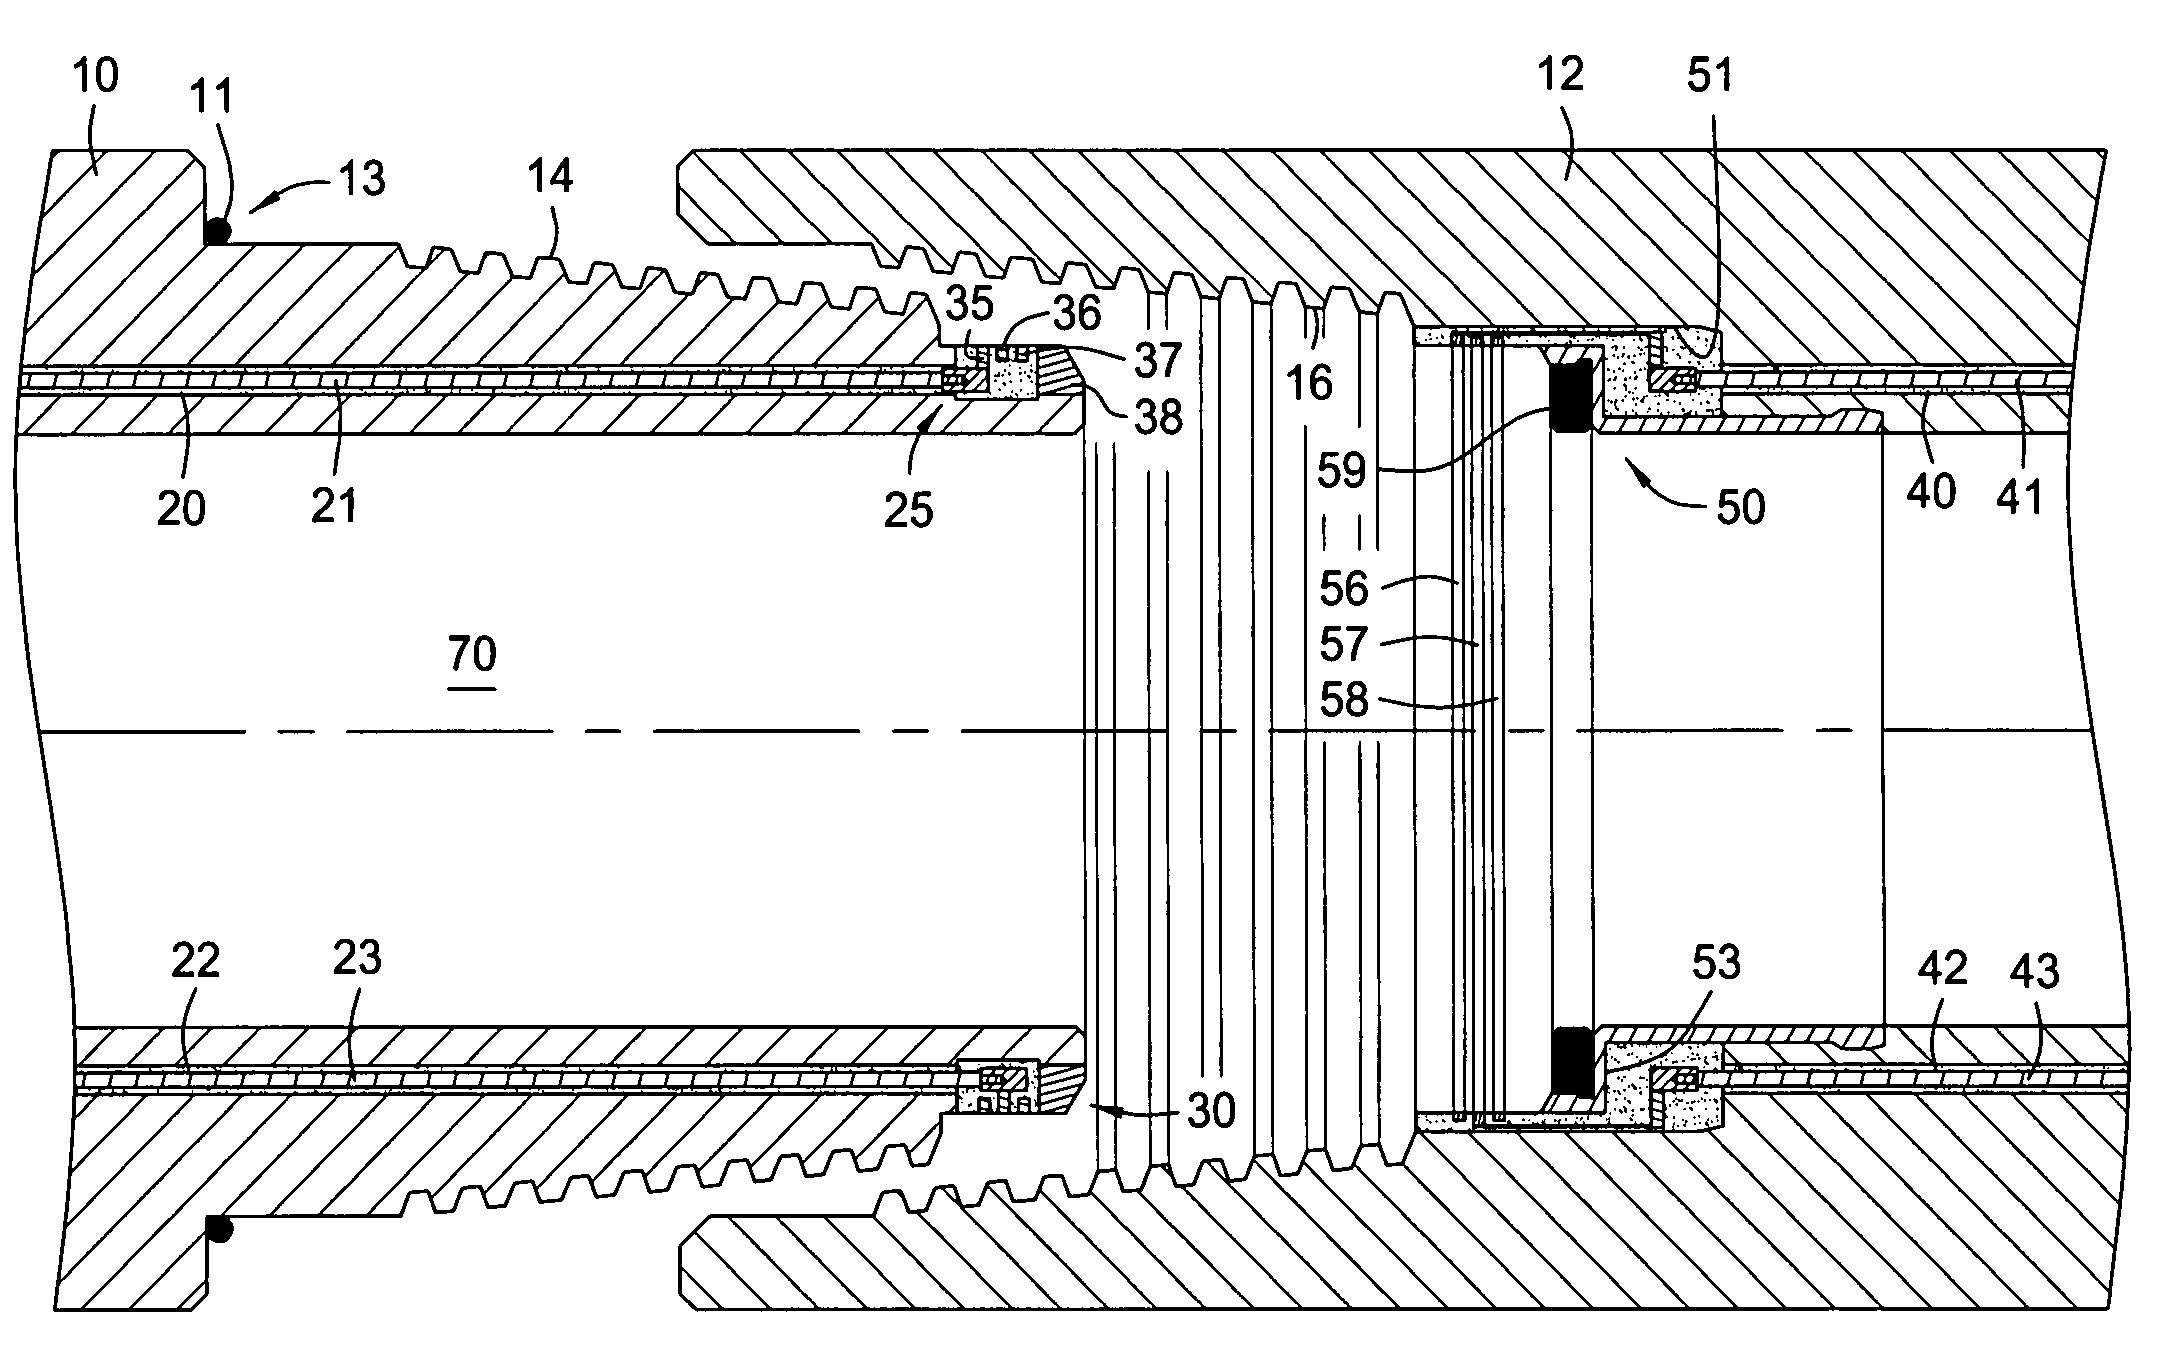 Electrical conducting system